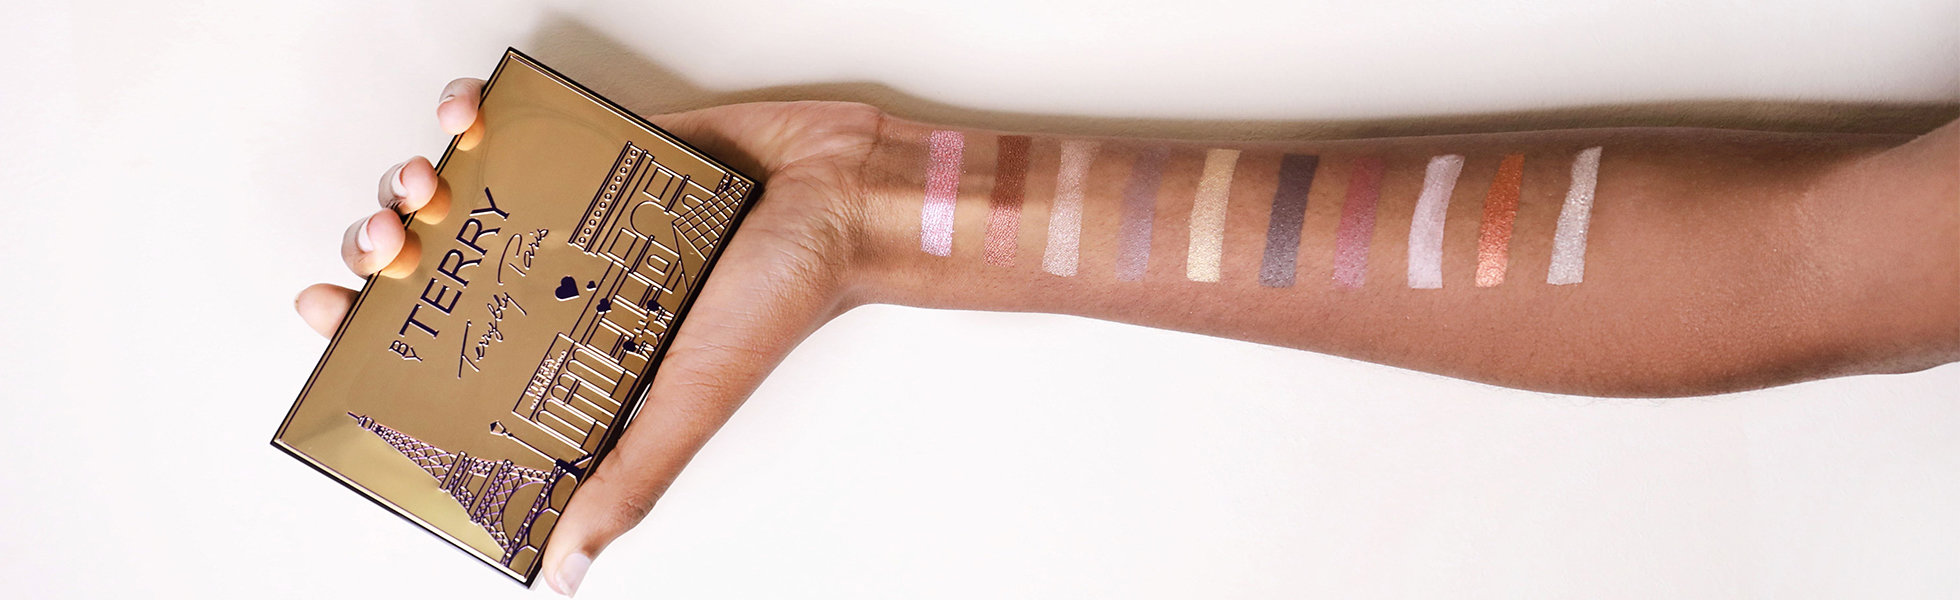 BY TERRY VIP Expert Palette – Paris by Light Arm Swatches